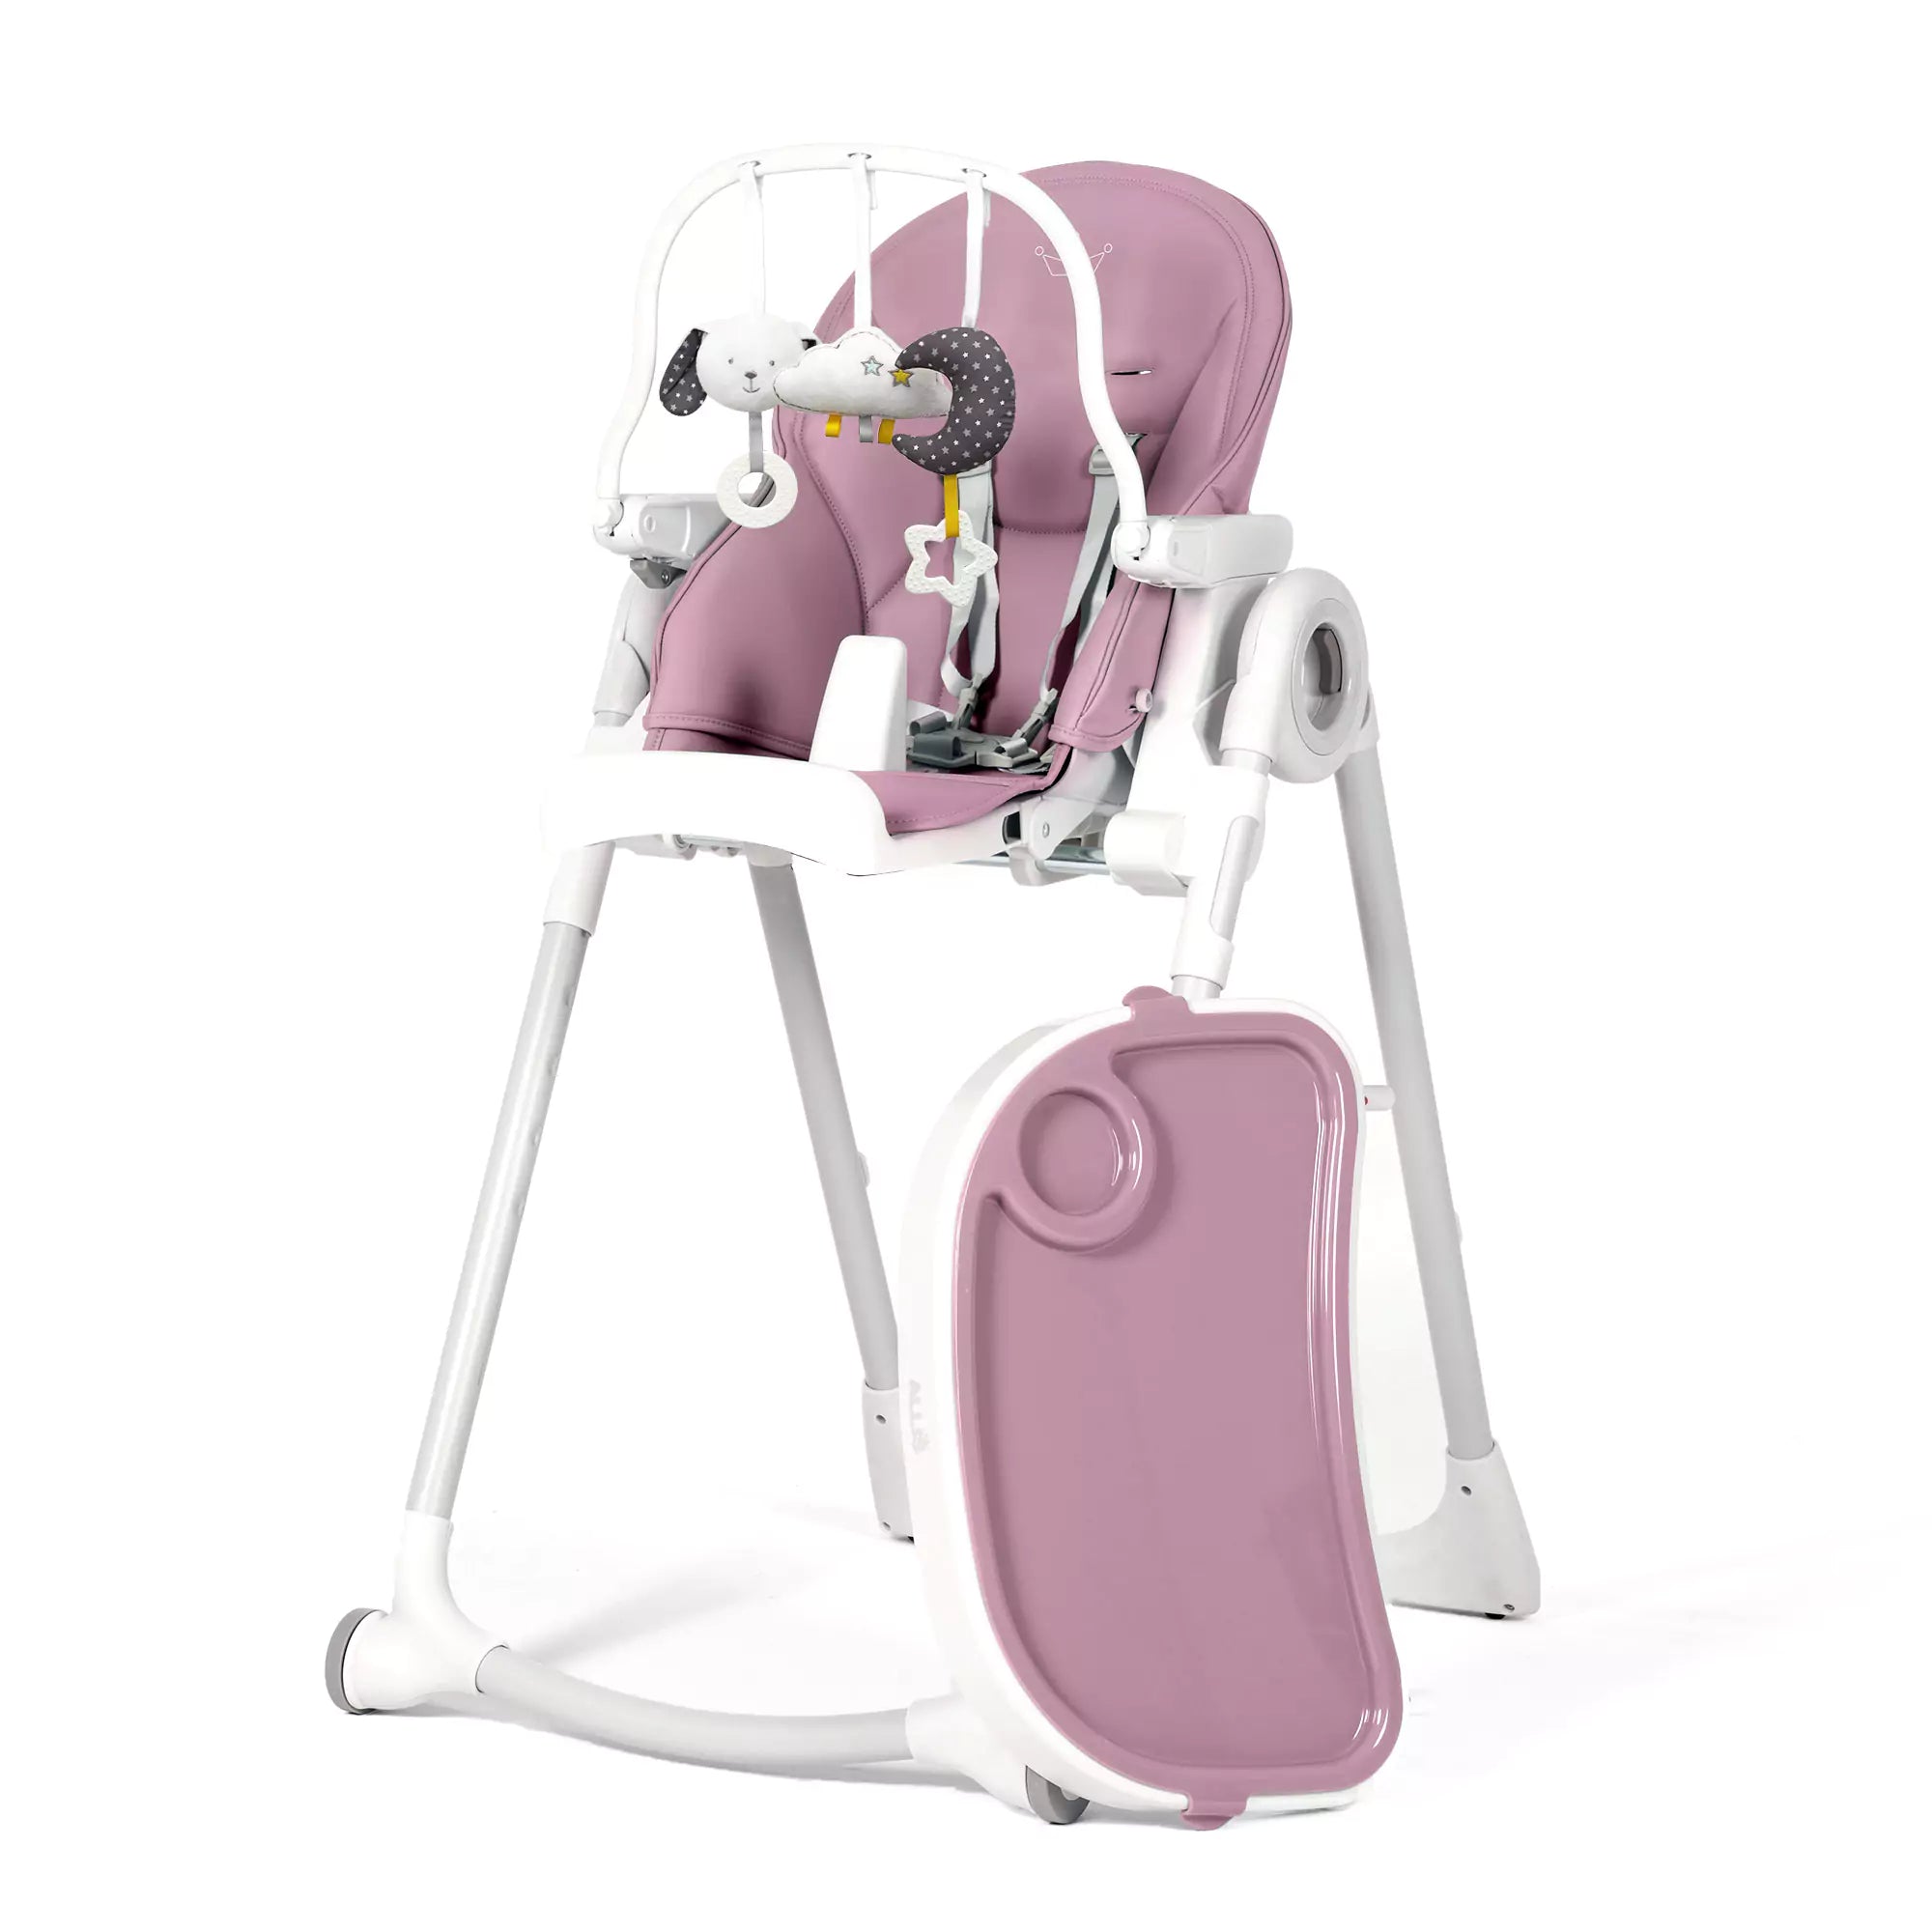 An image of Buy Amethyst High Chair for Baby at SmallSmart UK